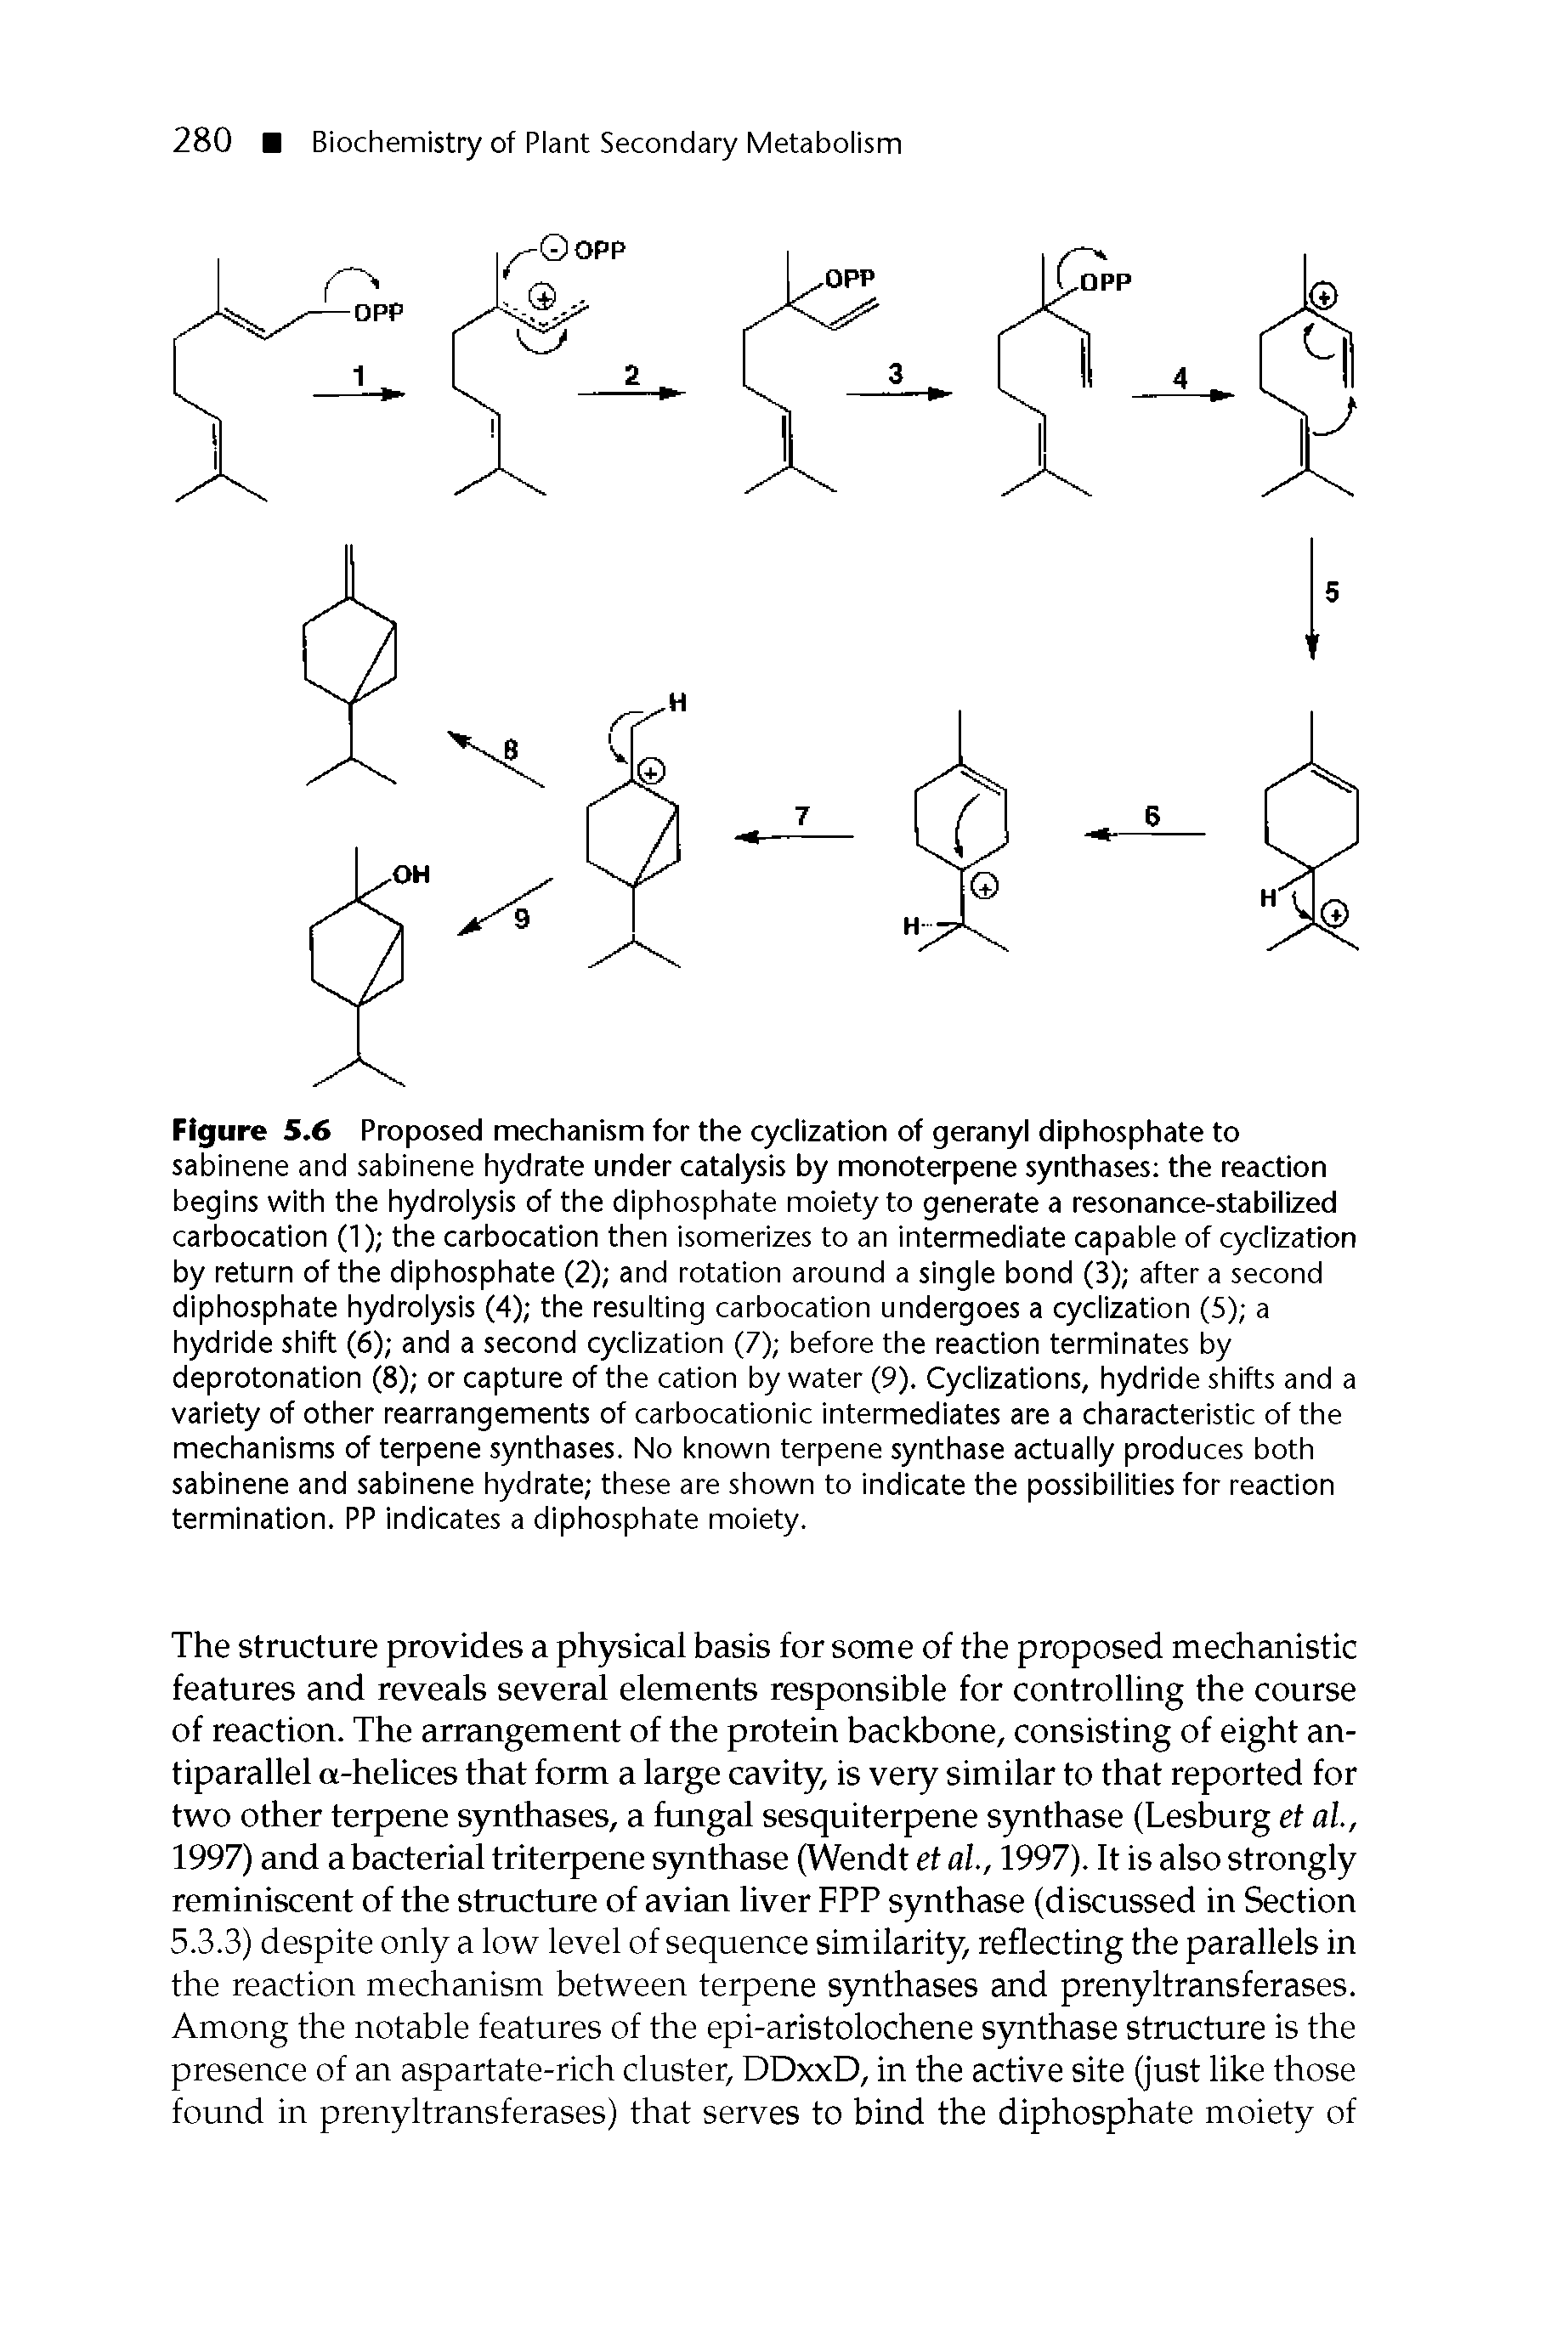 Figure 5.6 Proposed mechanism for the cyclization of geranyl diphosphate to sabinene and sabinene hydrate under catalysis by monoterpene synthases the reaction begins with the hydrolysis of the diphosphate moiety to generate a resonance-stabilized carbocation (1) the carbocation then isomerizes to an intermediate capable of cyclization by return of the diphosphate (2) and rotation around a single bond (3) after a second diphosphate hydrolysis (4) the resulting carbocation undergoes a cyclization (5) a hydride shift (6) and a second cyclization (7) before the reaction terminates by deprotonation (8) or capture of the cation by water (9). Cyclizations, hydride shifts and a variety of other rearrangements of carbocationic intermediates are a characteristic of the mechanisms of terpene synthases. No known terpene synthase actually produces both sabinene and sabinene hydrate these are shown to indicate the possibilities for reaction termination. PP indicates a diphosphate moiety.